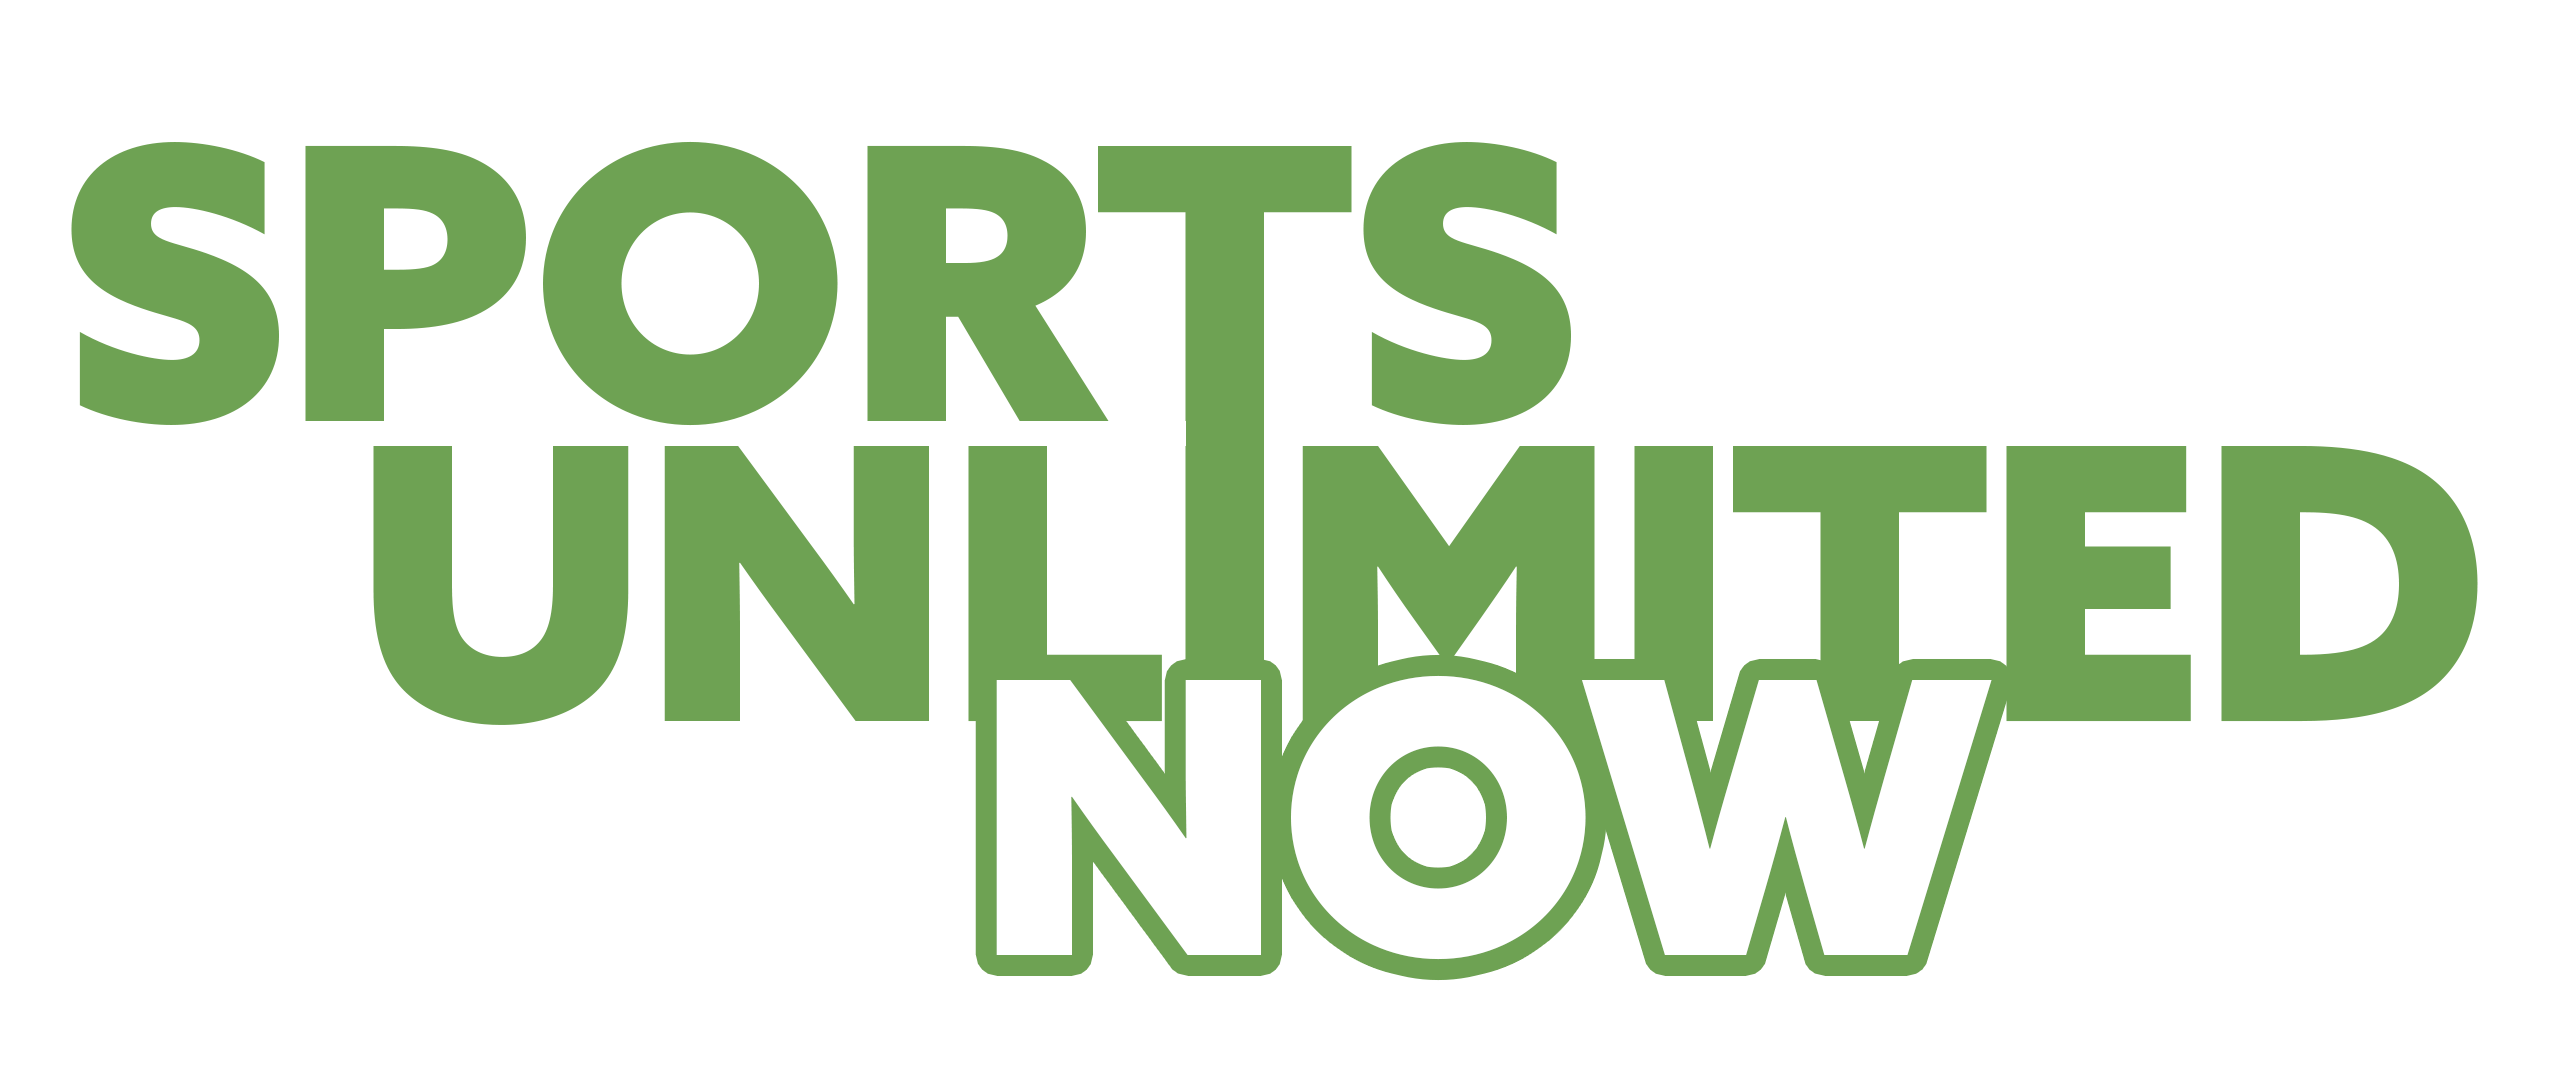 Sports Unlimited Now logo